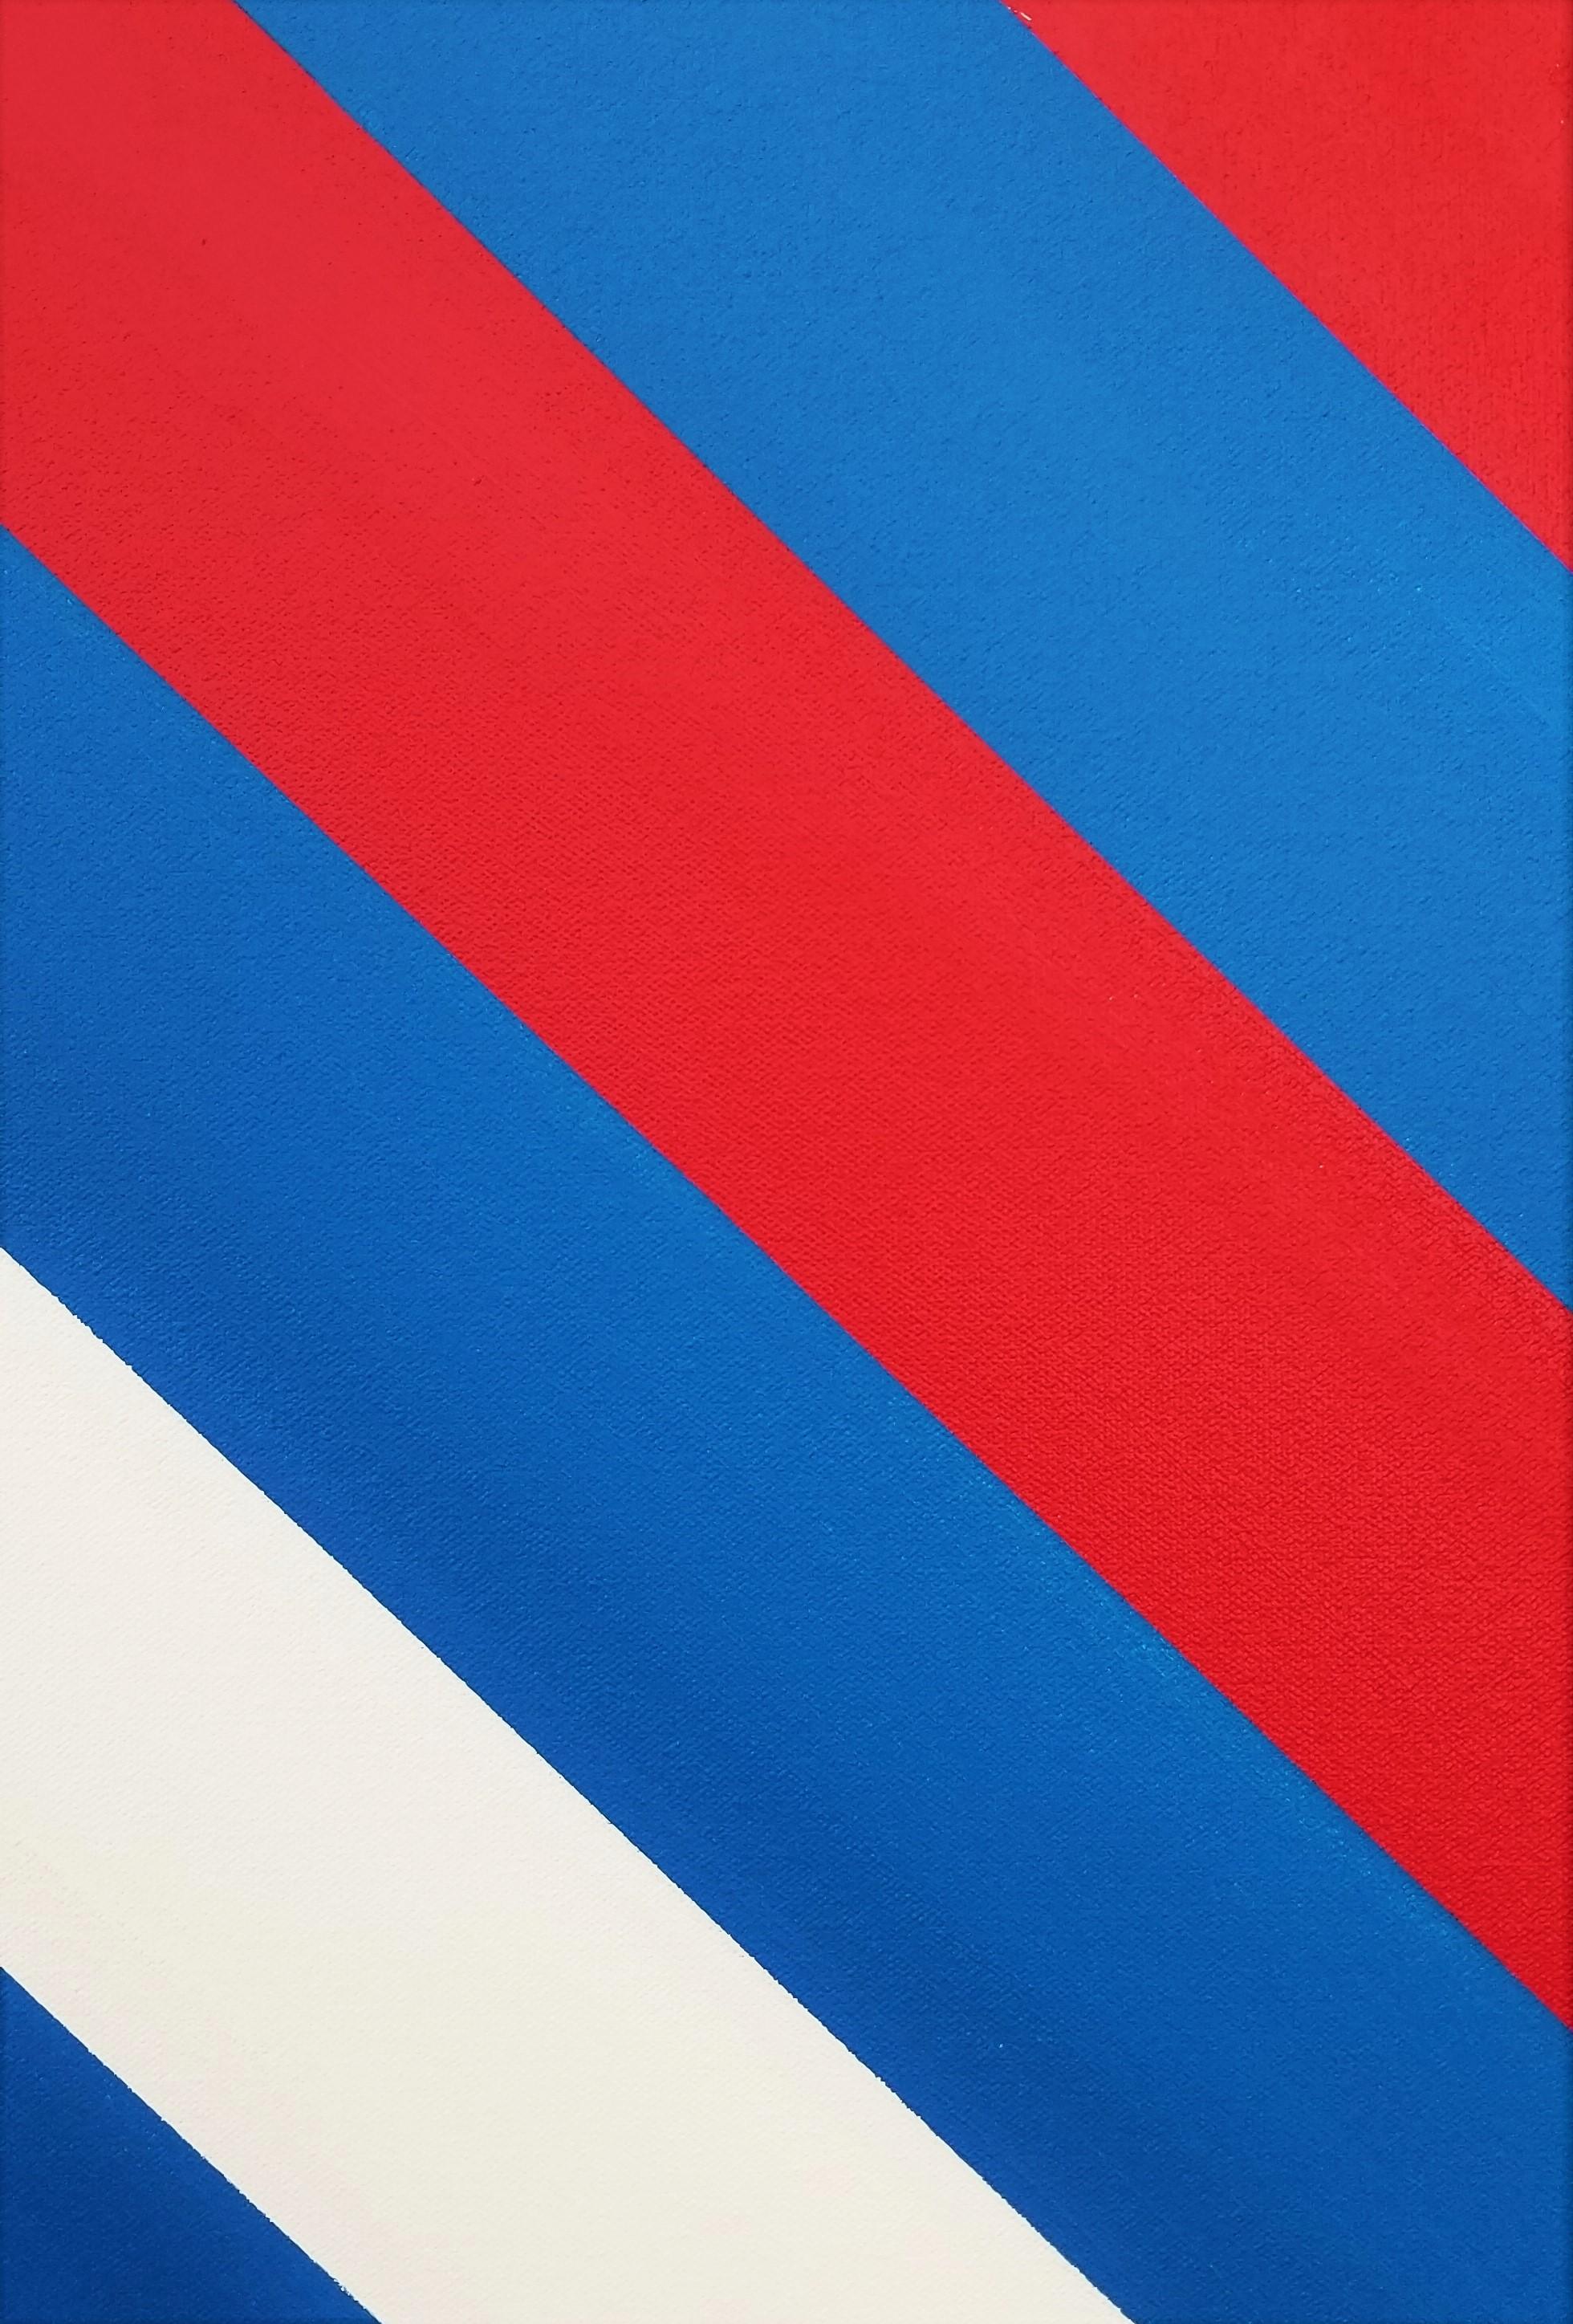 Diamond XLV /// Contemporary Abstract Geometric Striped Blue Red White Painting For Sale 8